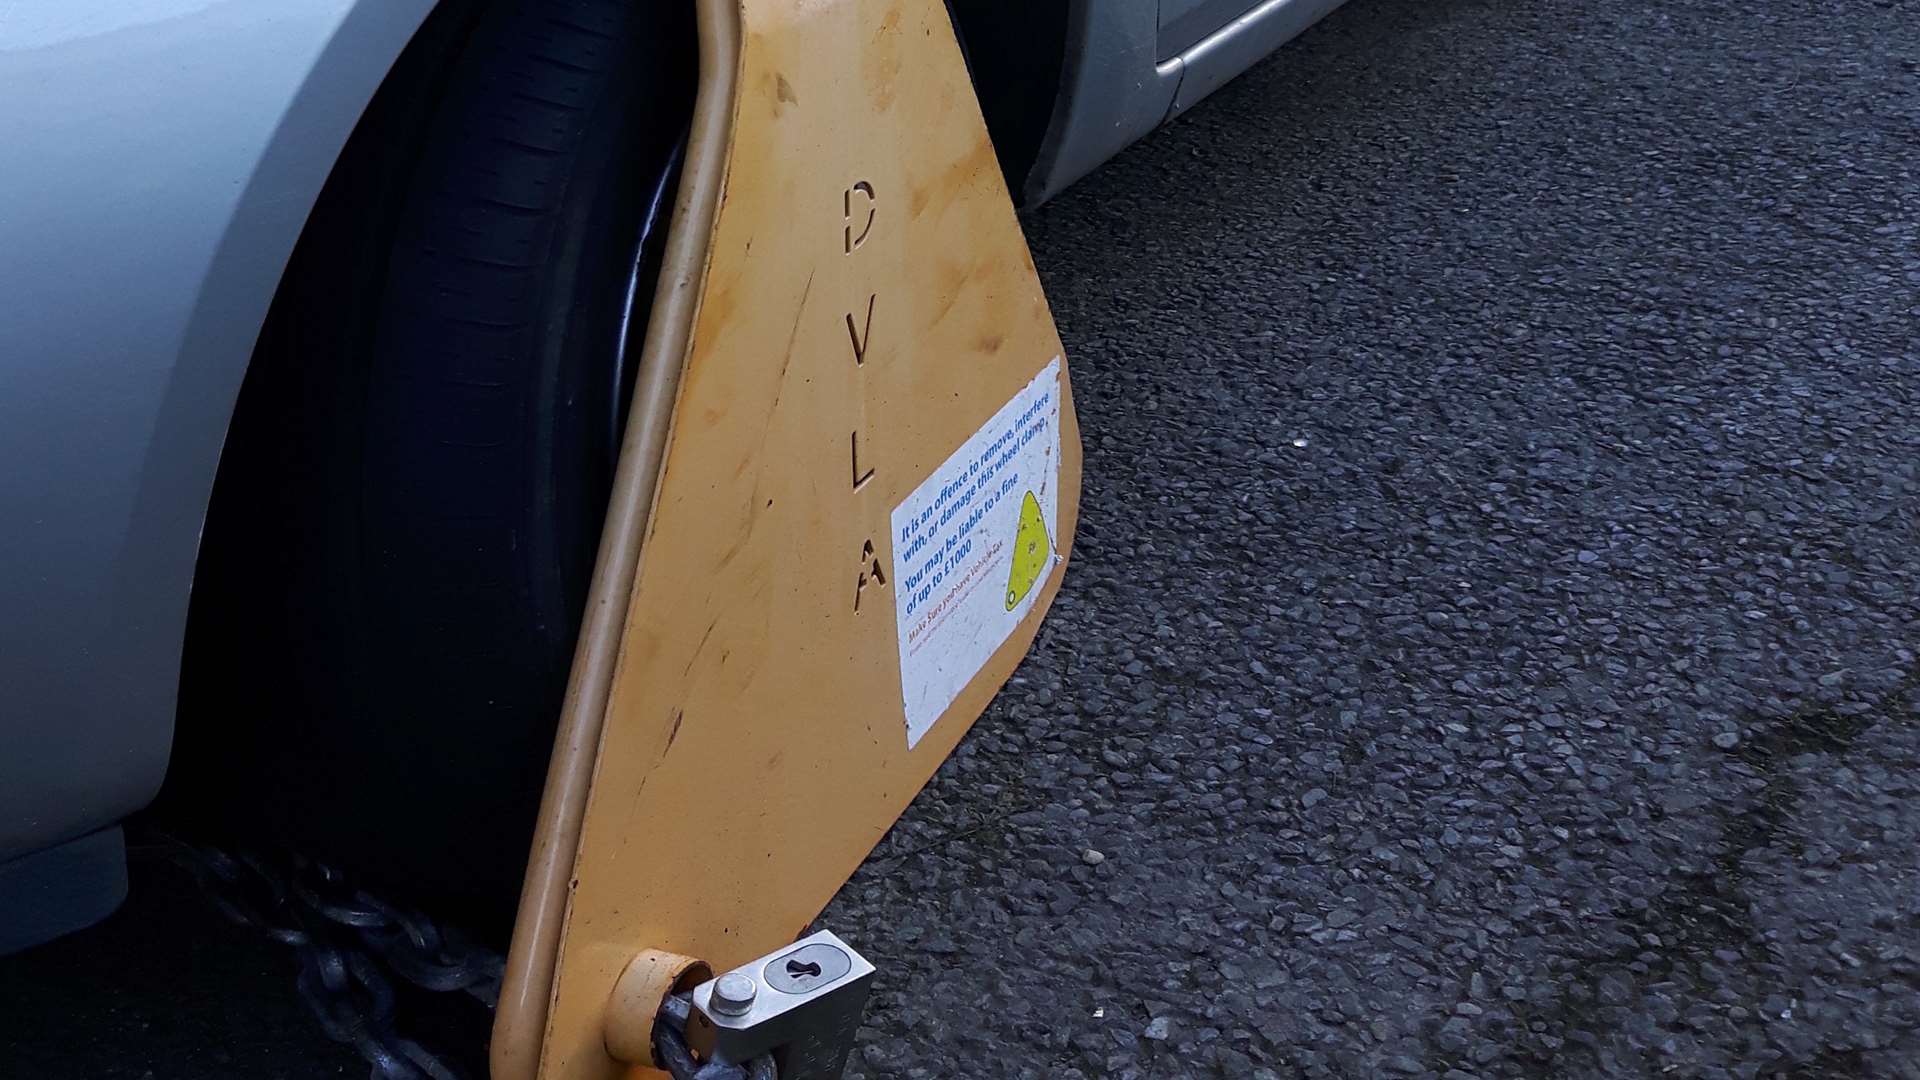 16 vehicles were clamped as part of the joint crackdown